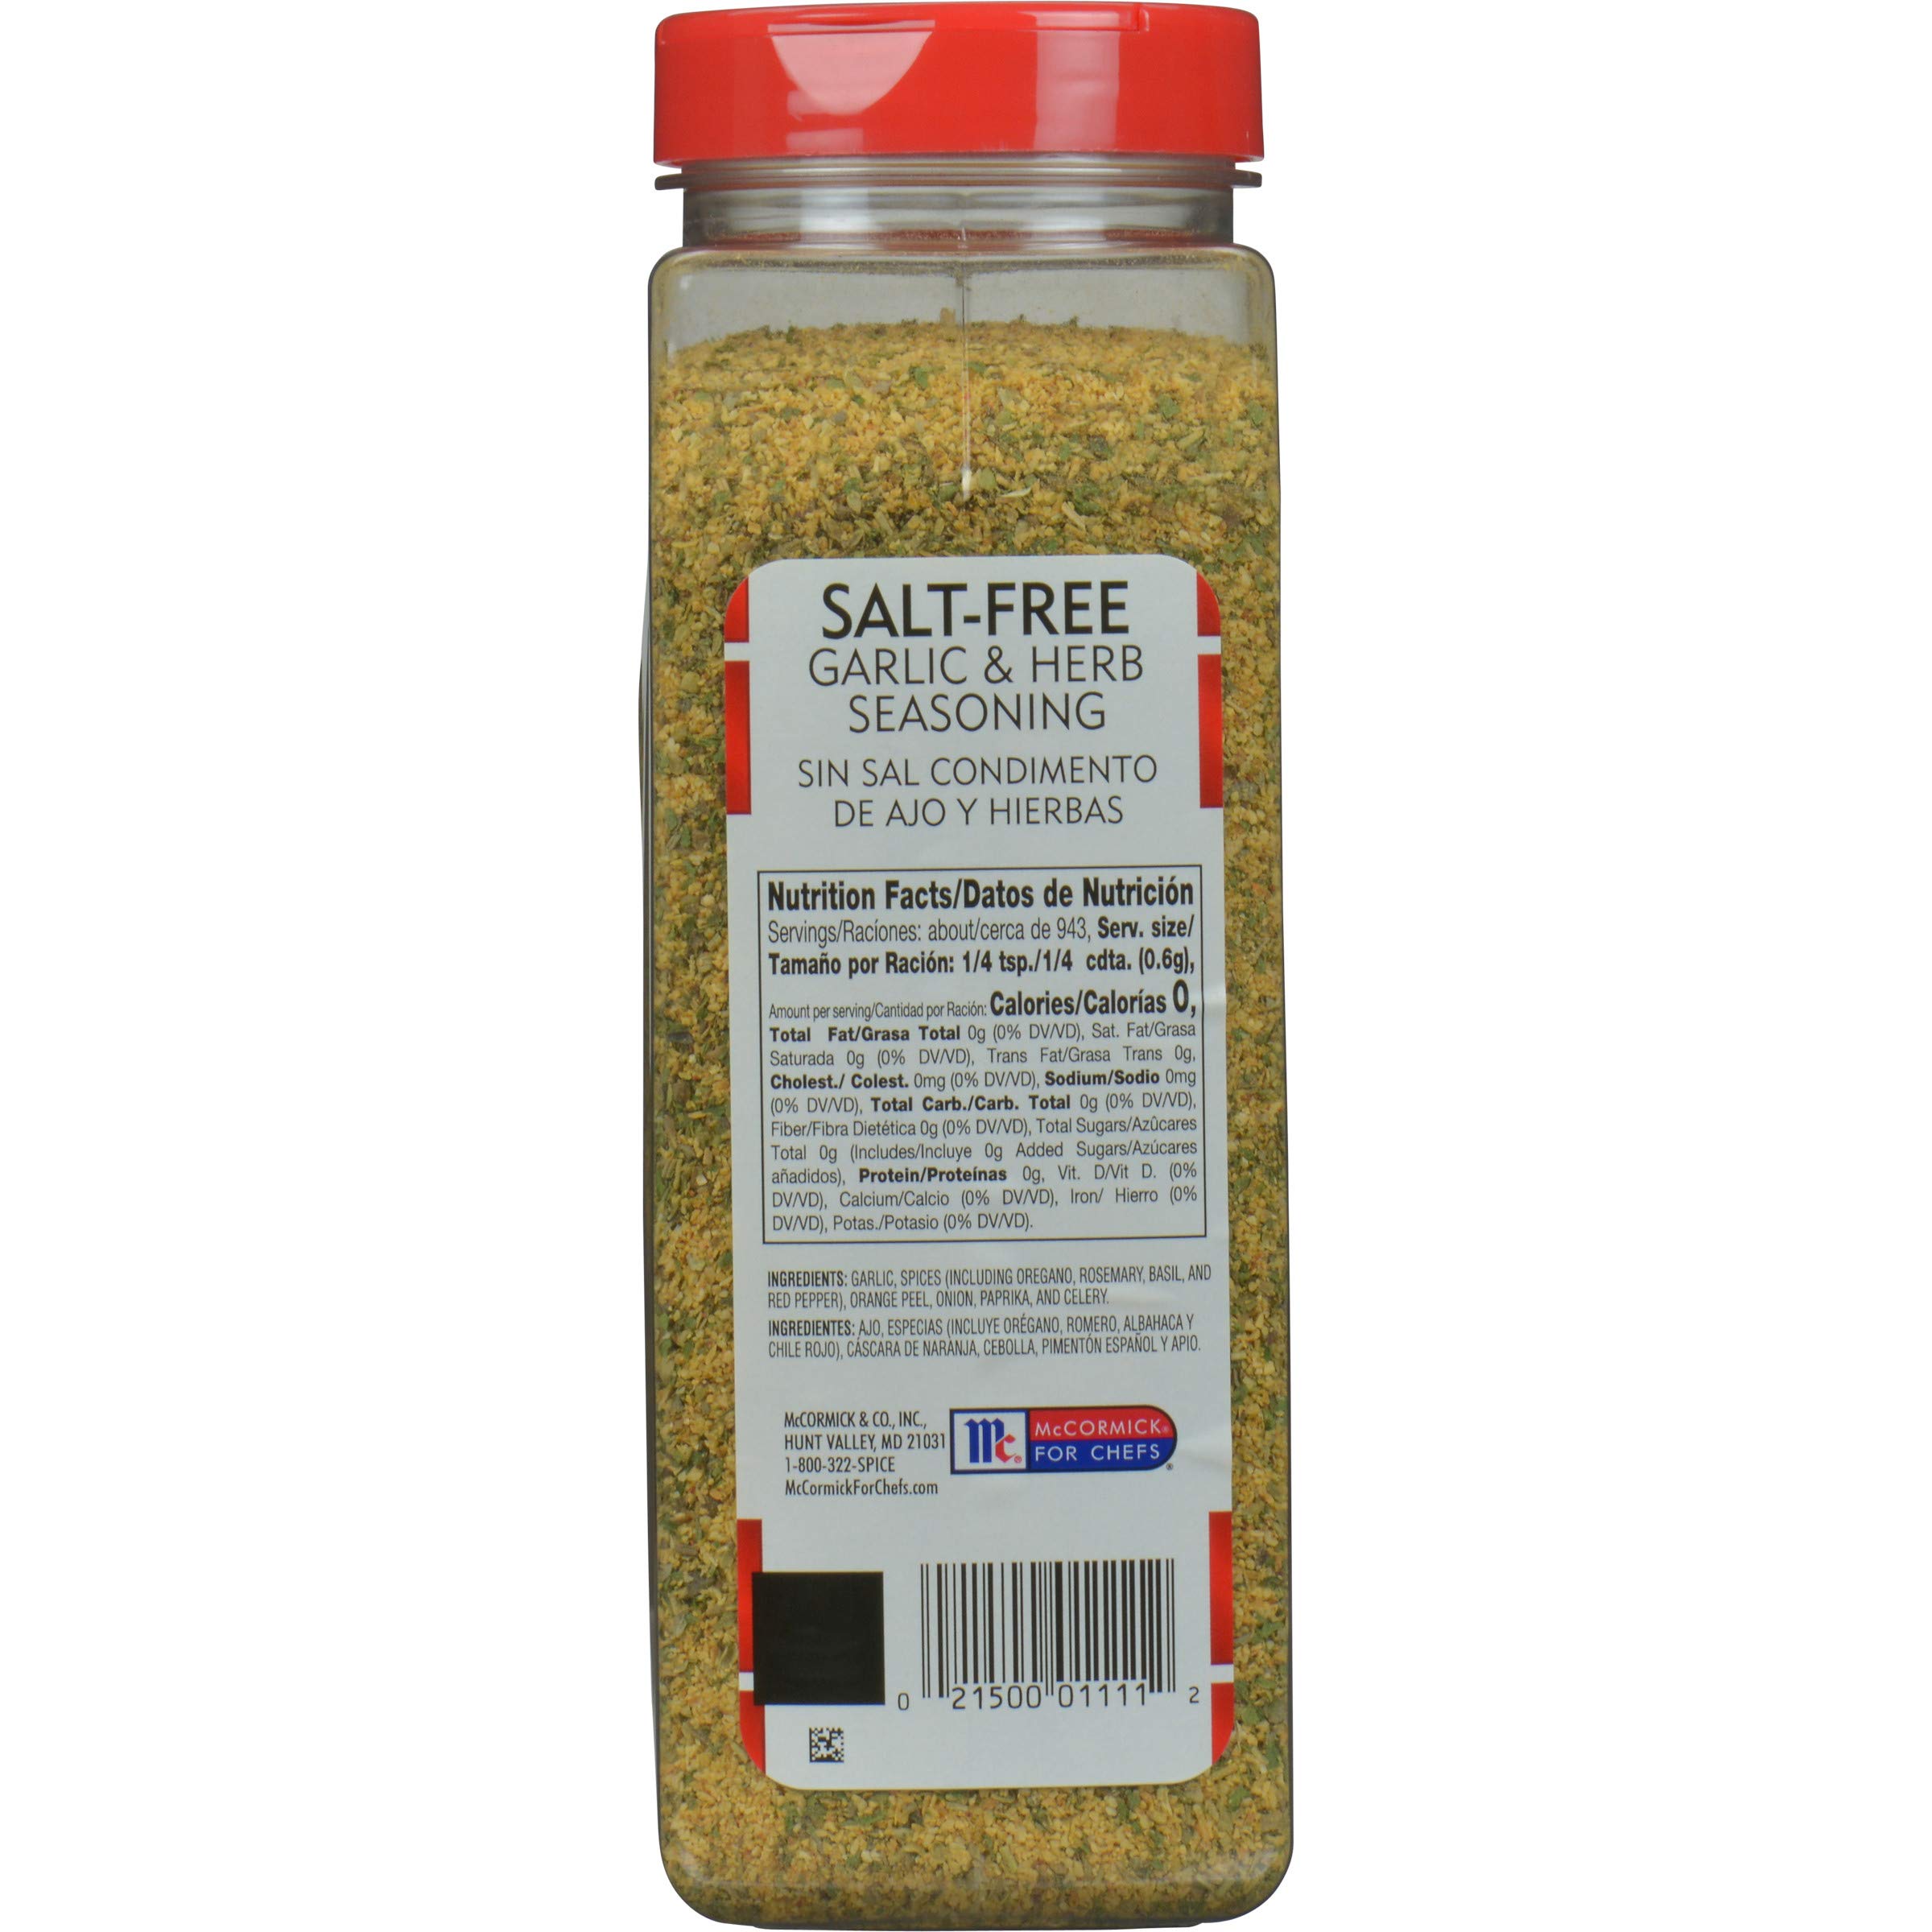 McCormick Perfect Pinch Garlic & Herb Seasoning, 19 oz - One 19 Ounce Container of Garlic Herb Seasoning to Add Zesty Flavor to Chicken, Pasta, Salads and More